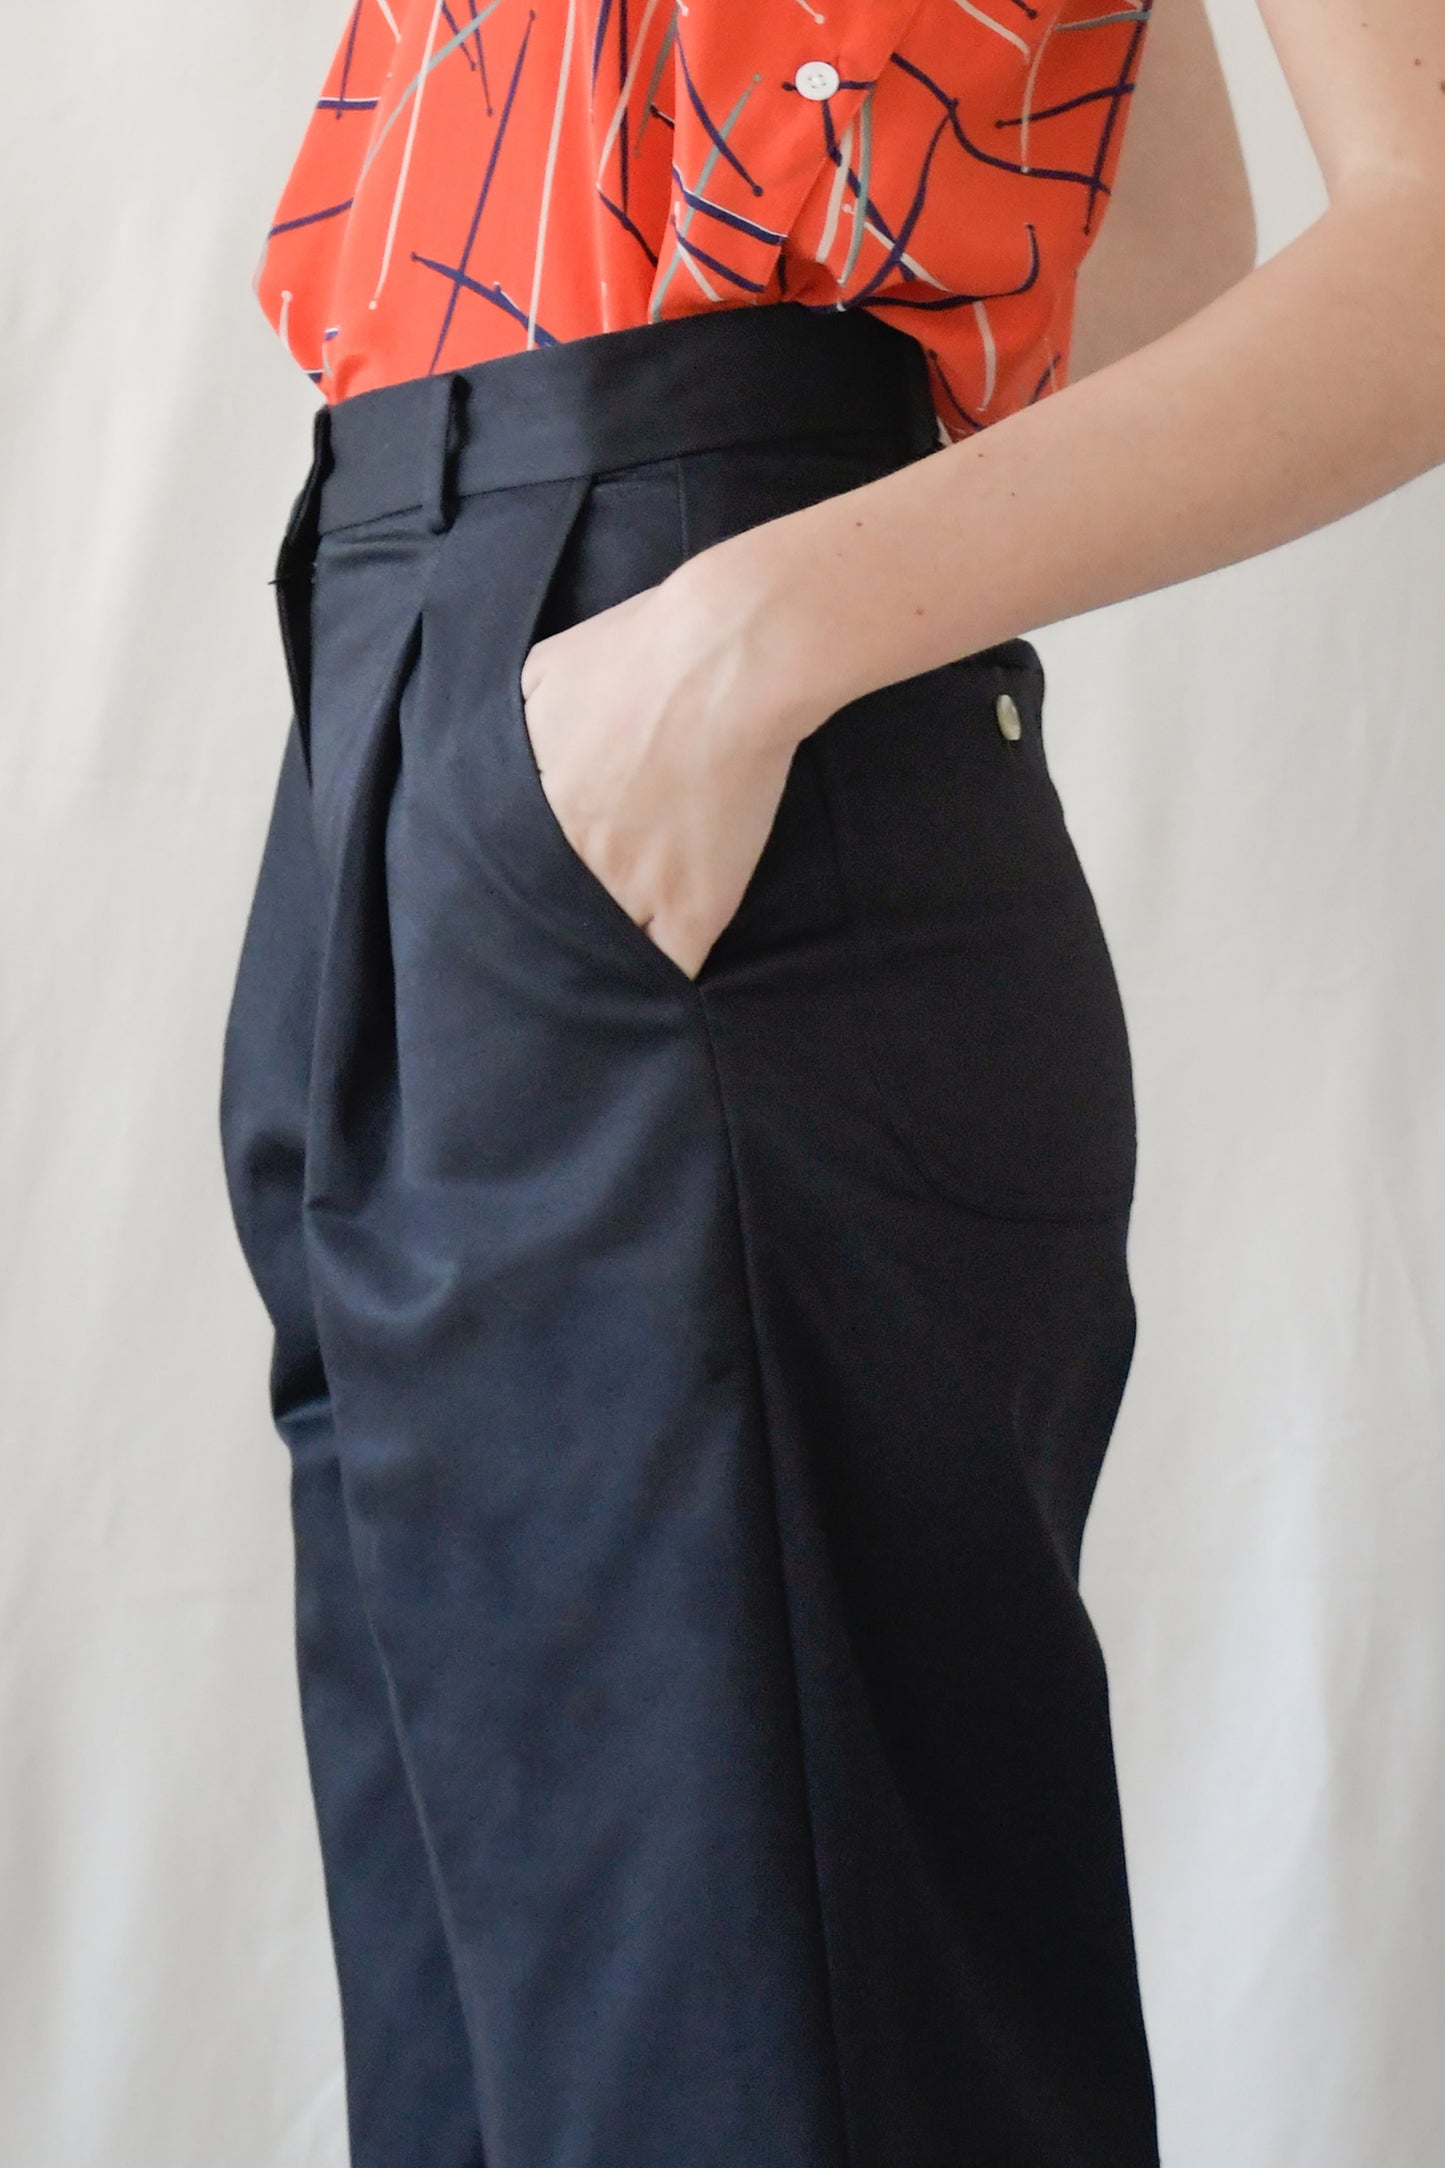 Cropped Pants / Navy Twill